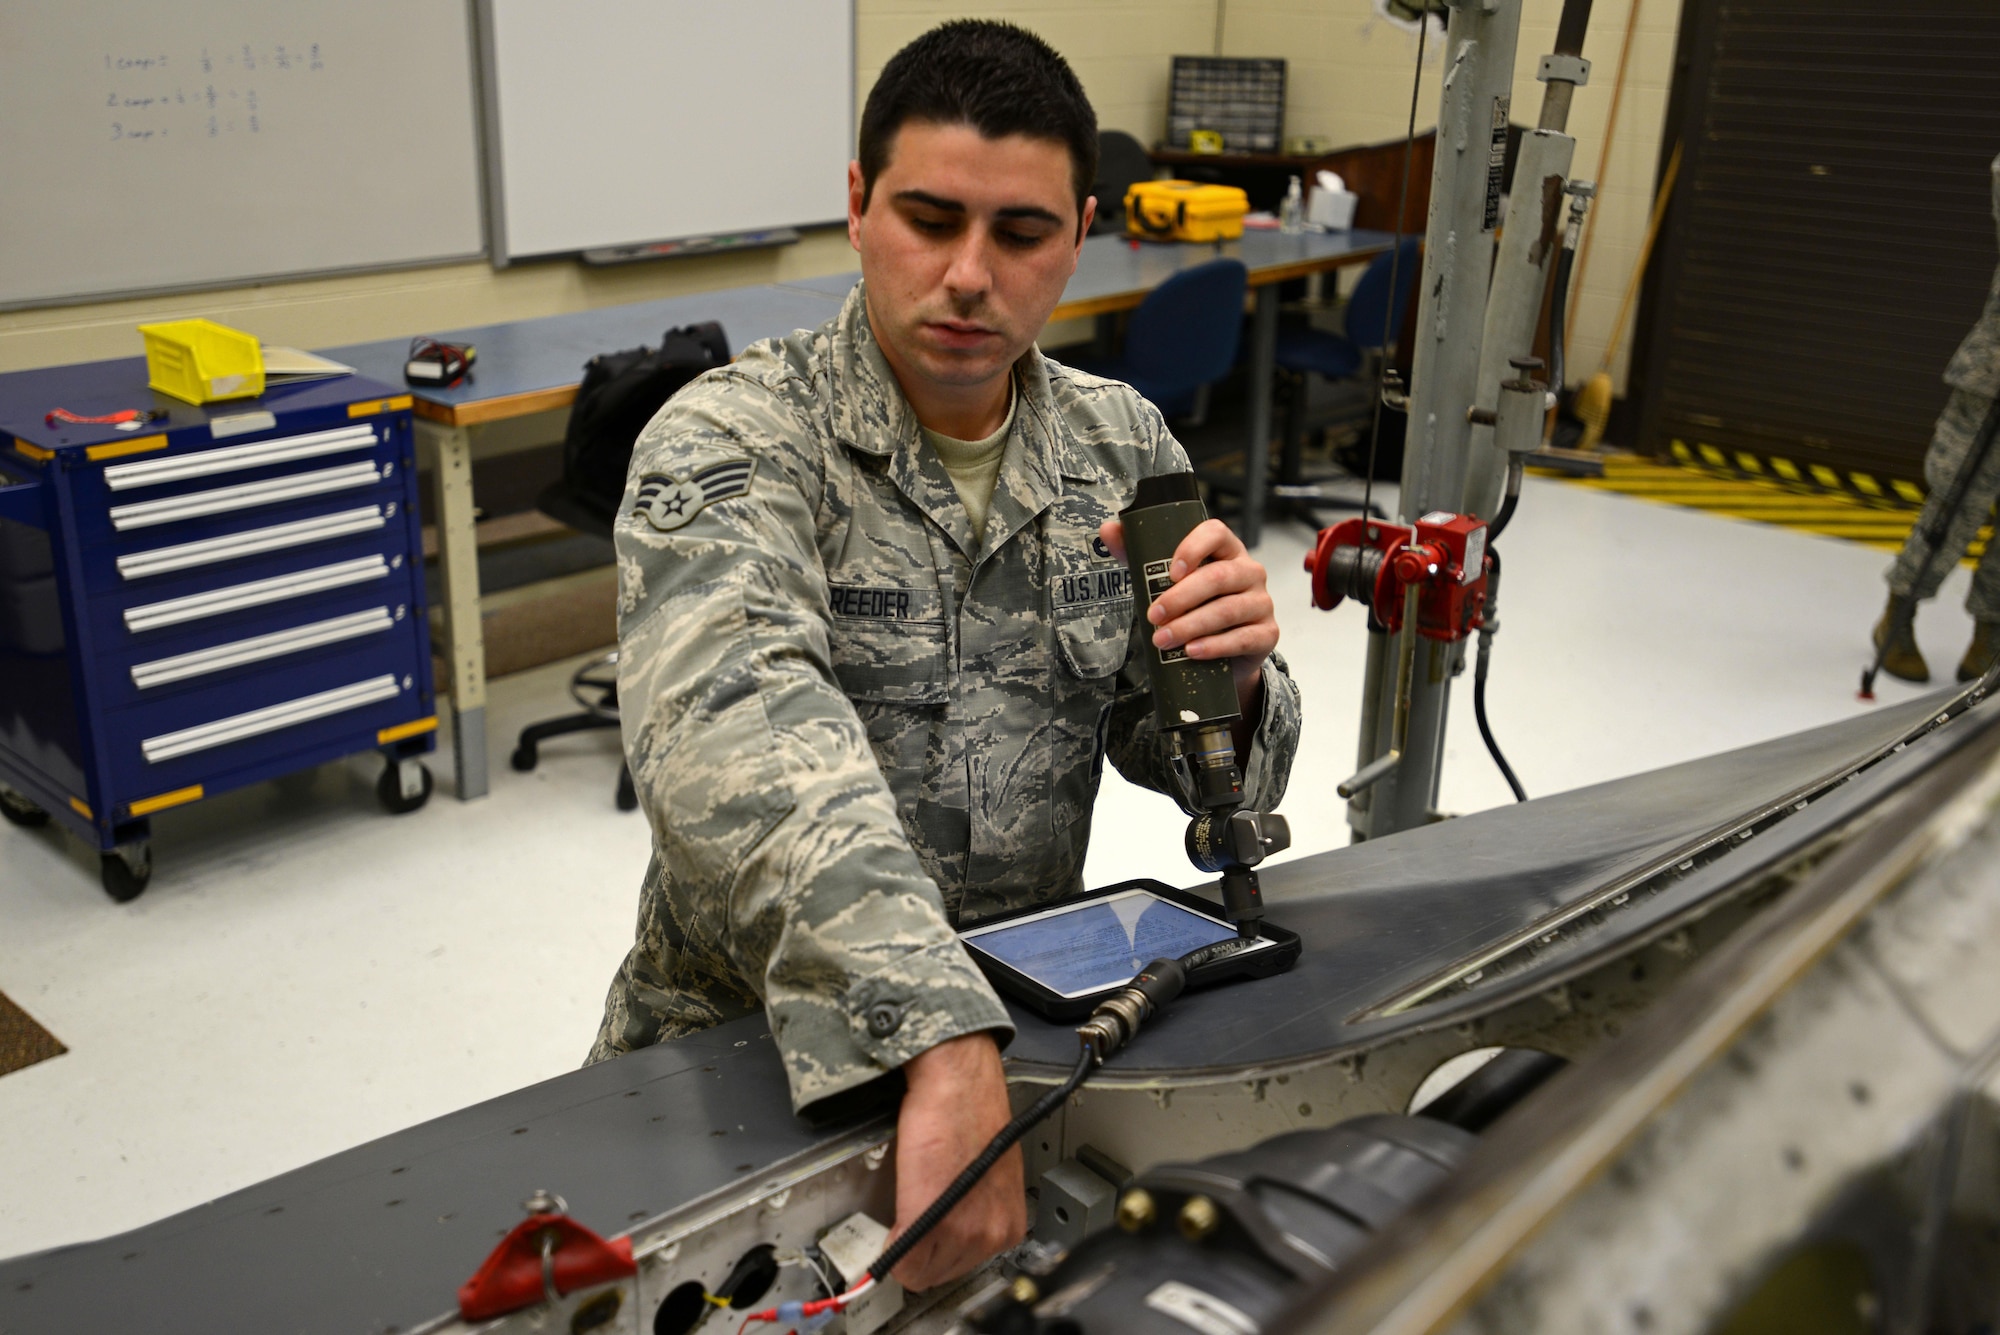 U.S. Air Force Senior Airman Collin Reeder, weapons standardization technician assigned to the 96th Maintenance Group at Eglin Air Force Base, Fla., assists in a gun hydraulic bleed and leak test on a mock F-16CM Fighting Falcon body during training at the 372nd Training Squadron, Detachment 202 F-16 Field Training Detachment (FTD) at Shaw Air Force Base, S.C., April 25, 2017.  Reeder spent approximately three weeks at Shaw to attend the advanced aircraft equipment and munitions training offered by the FTD. (U.S. Air Force photo by Senior Airman Kelsey Tucker)